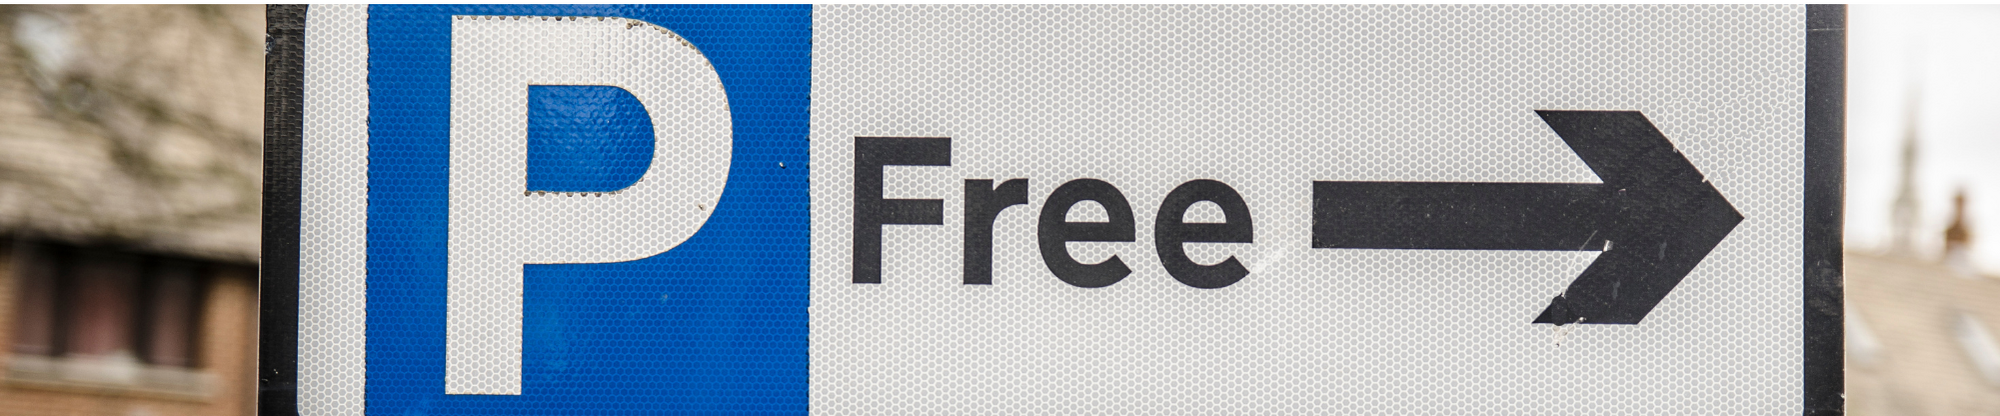 A parking sign with the word 'free' and an arrow.